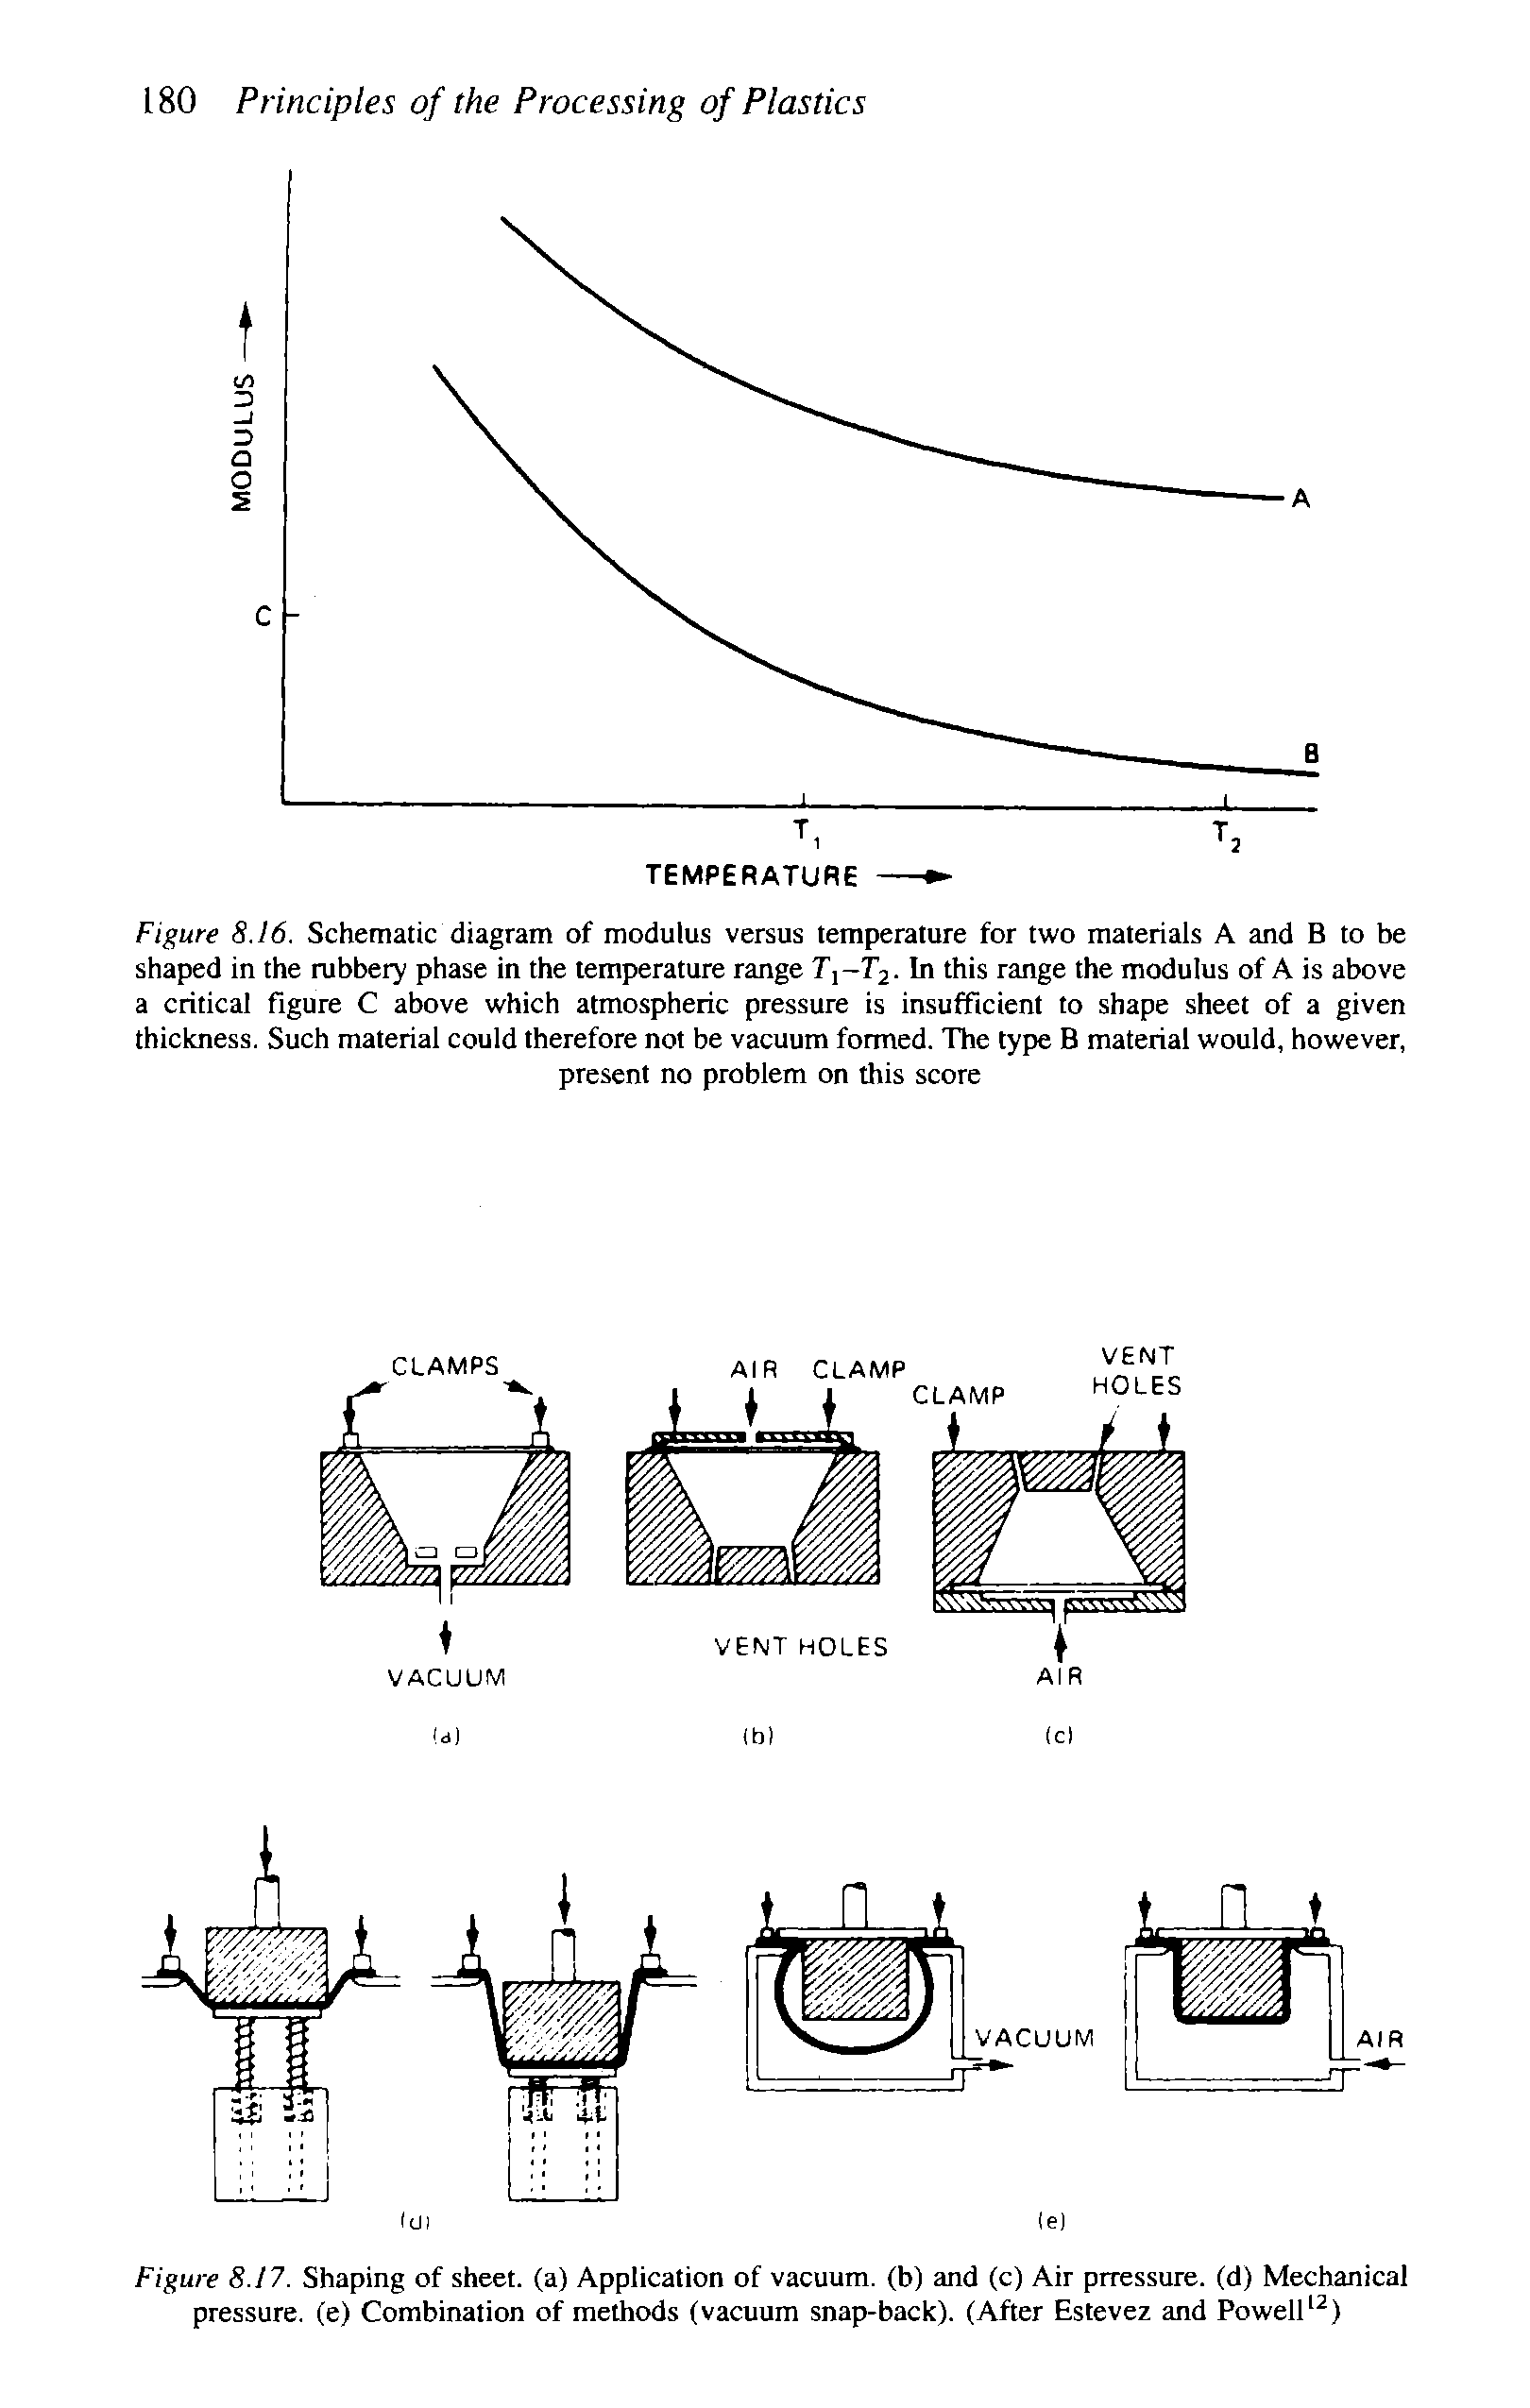 Figure 8.17. Shaping of sheet, (a) Application of vacuum, (b) and (c) Air prressure. (d) Mechanical pressure, (e) Combination of methods (vacuum snap-back). (After Estevez and Powell )...